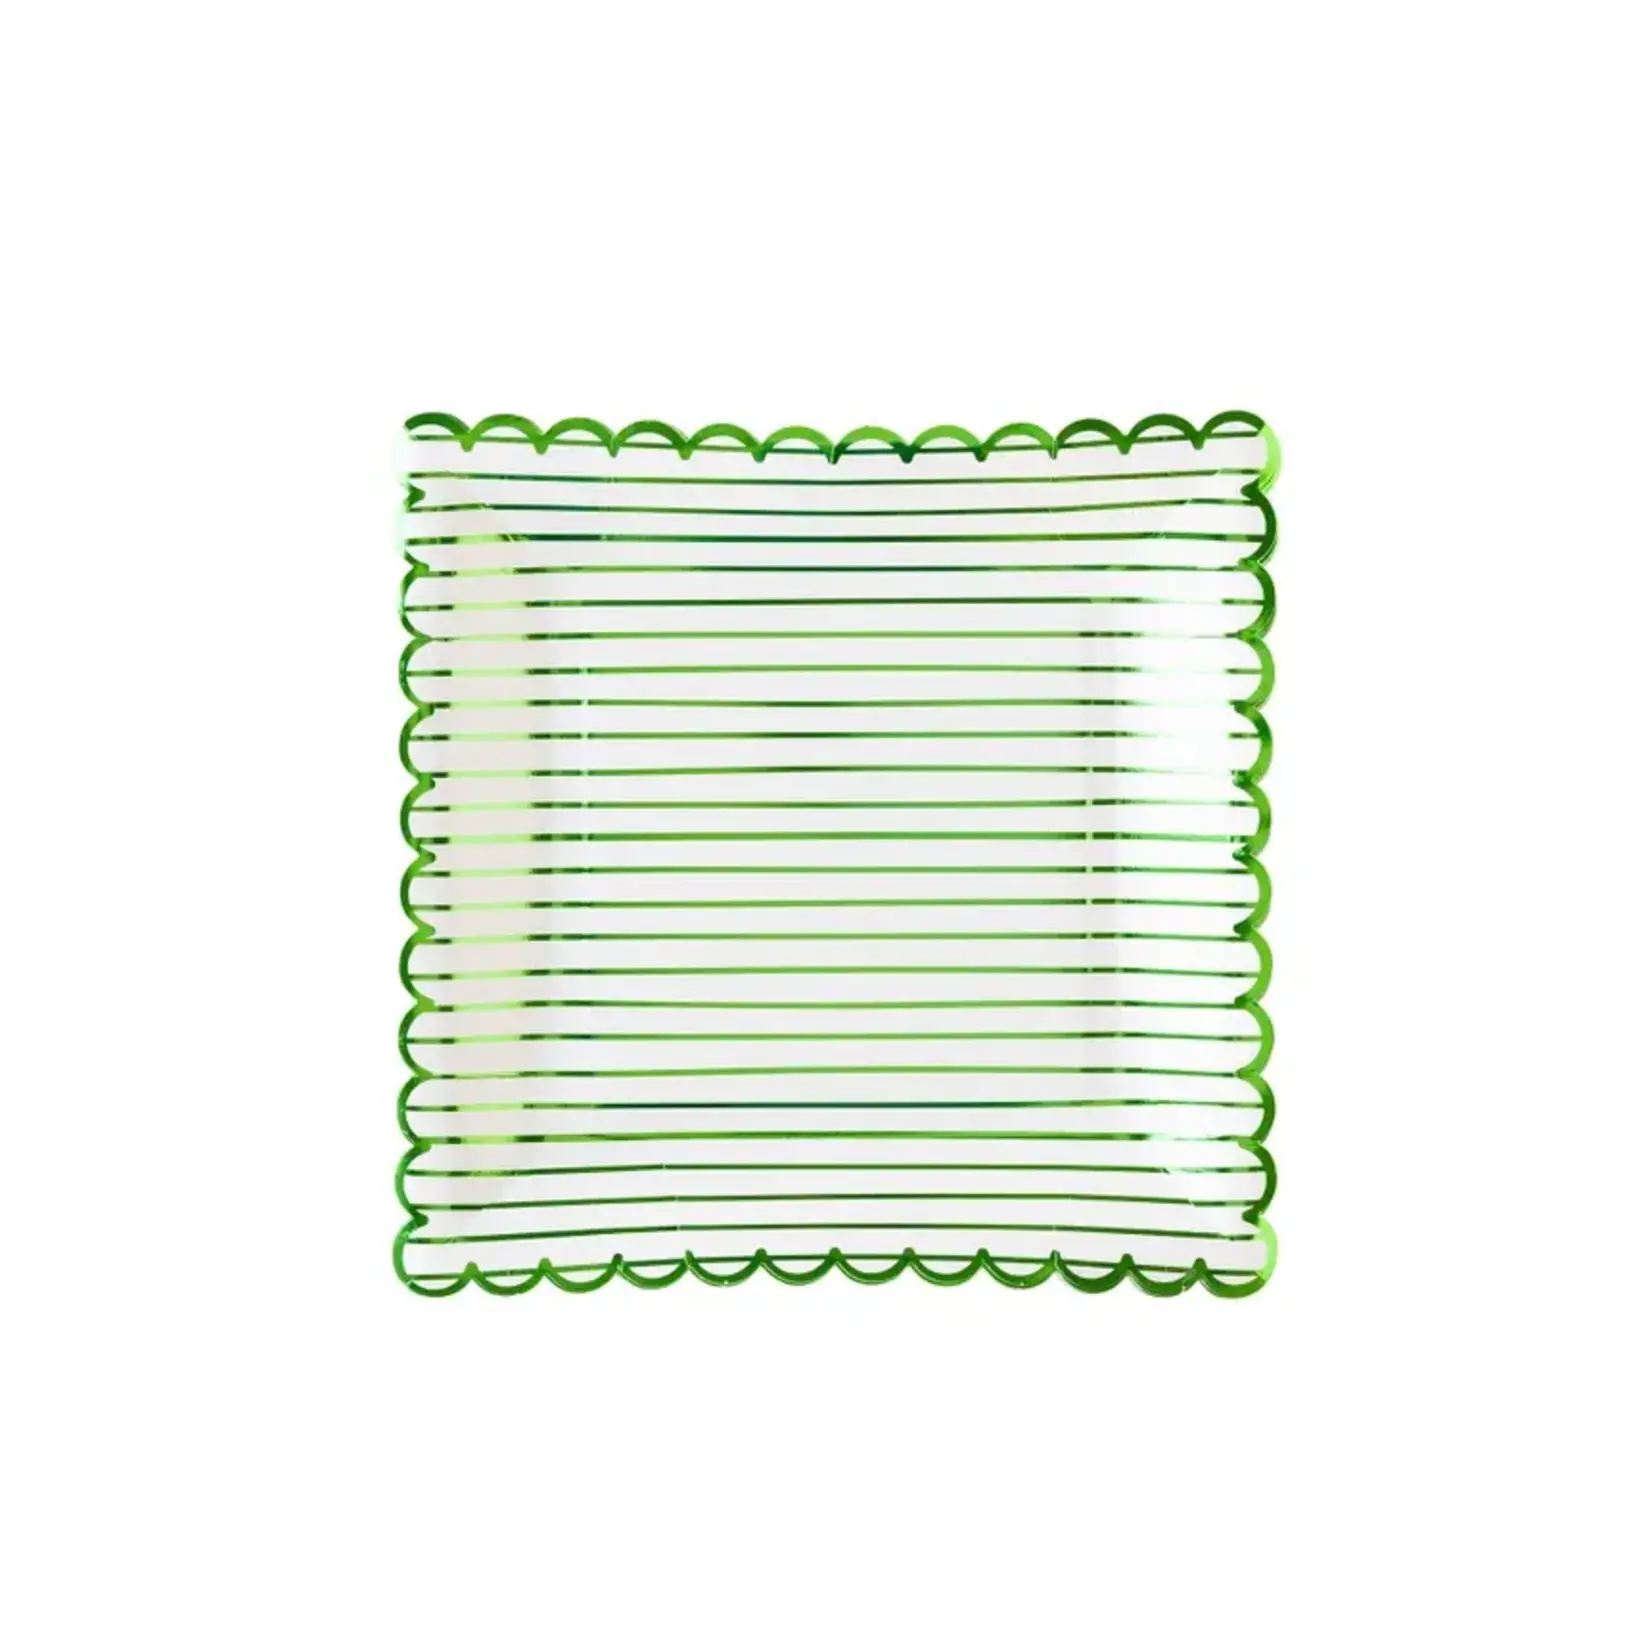 My Mind's Eye Green Striped Paper Plate